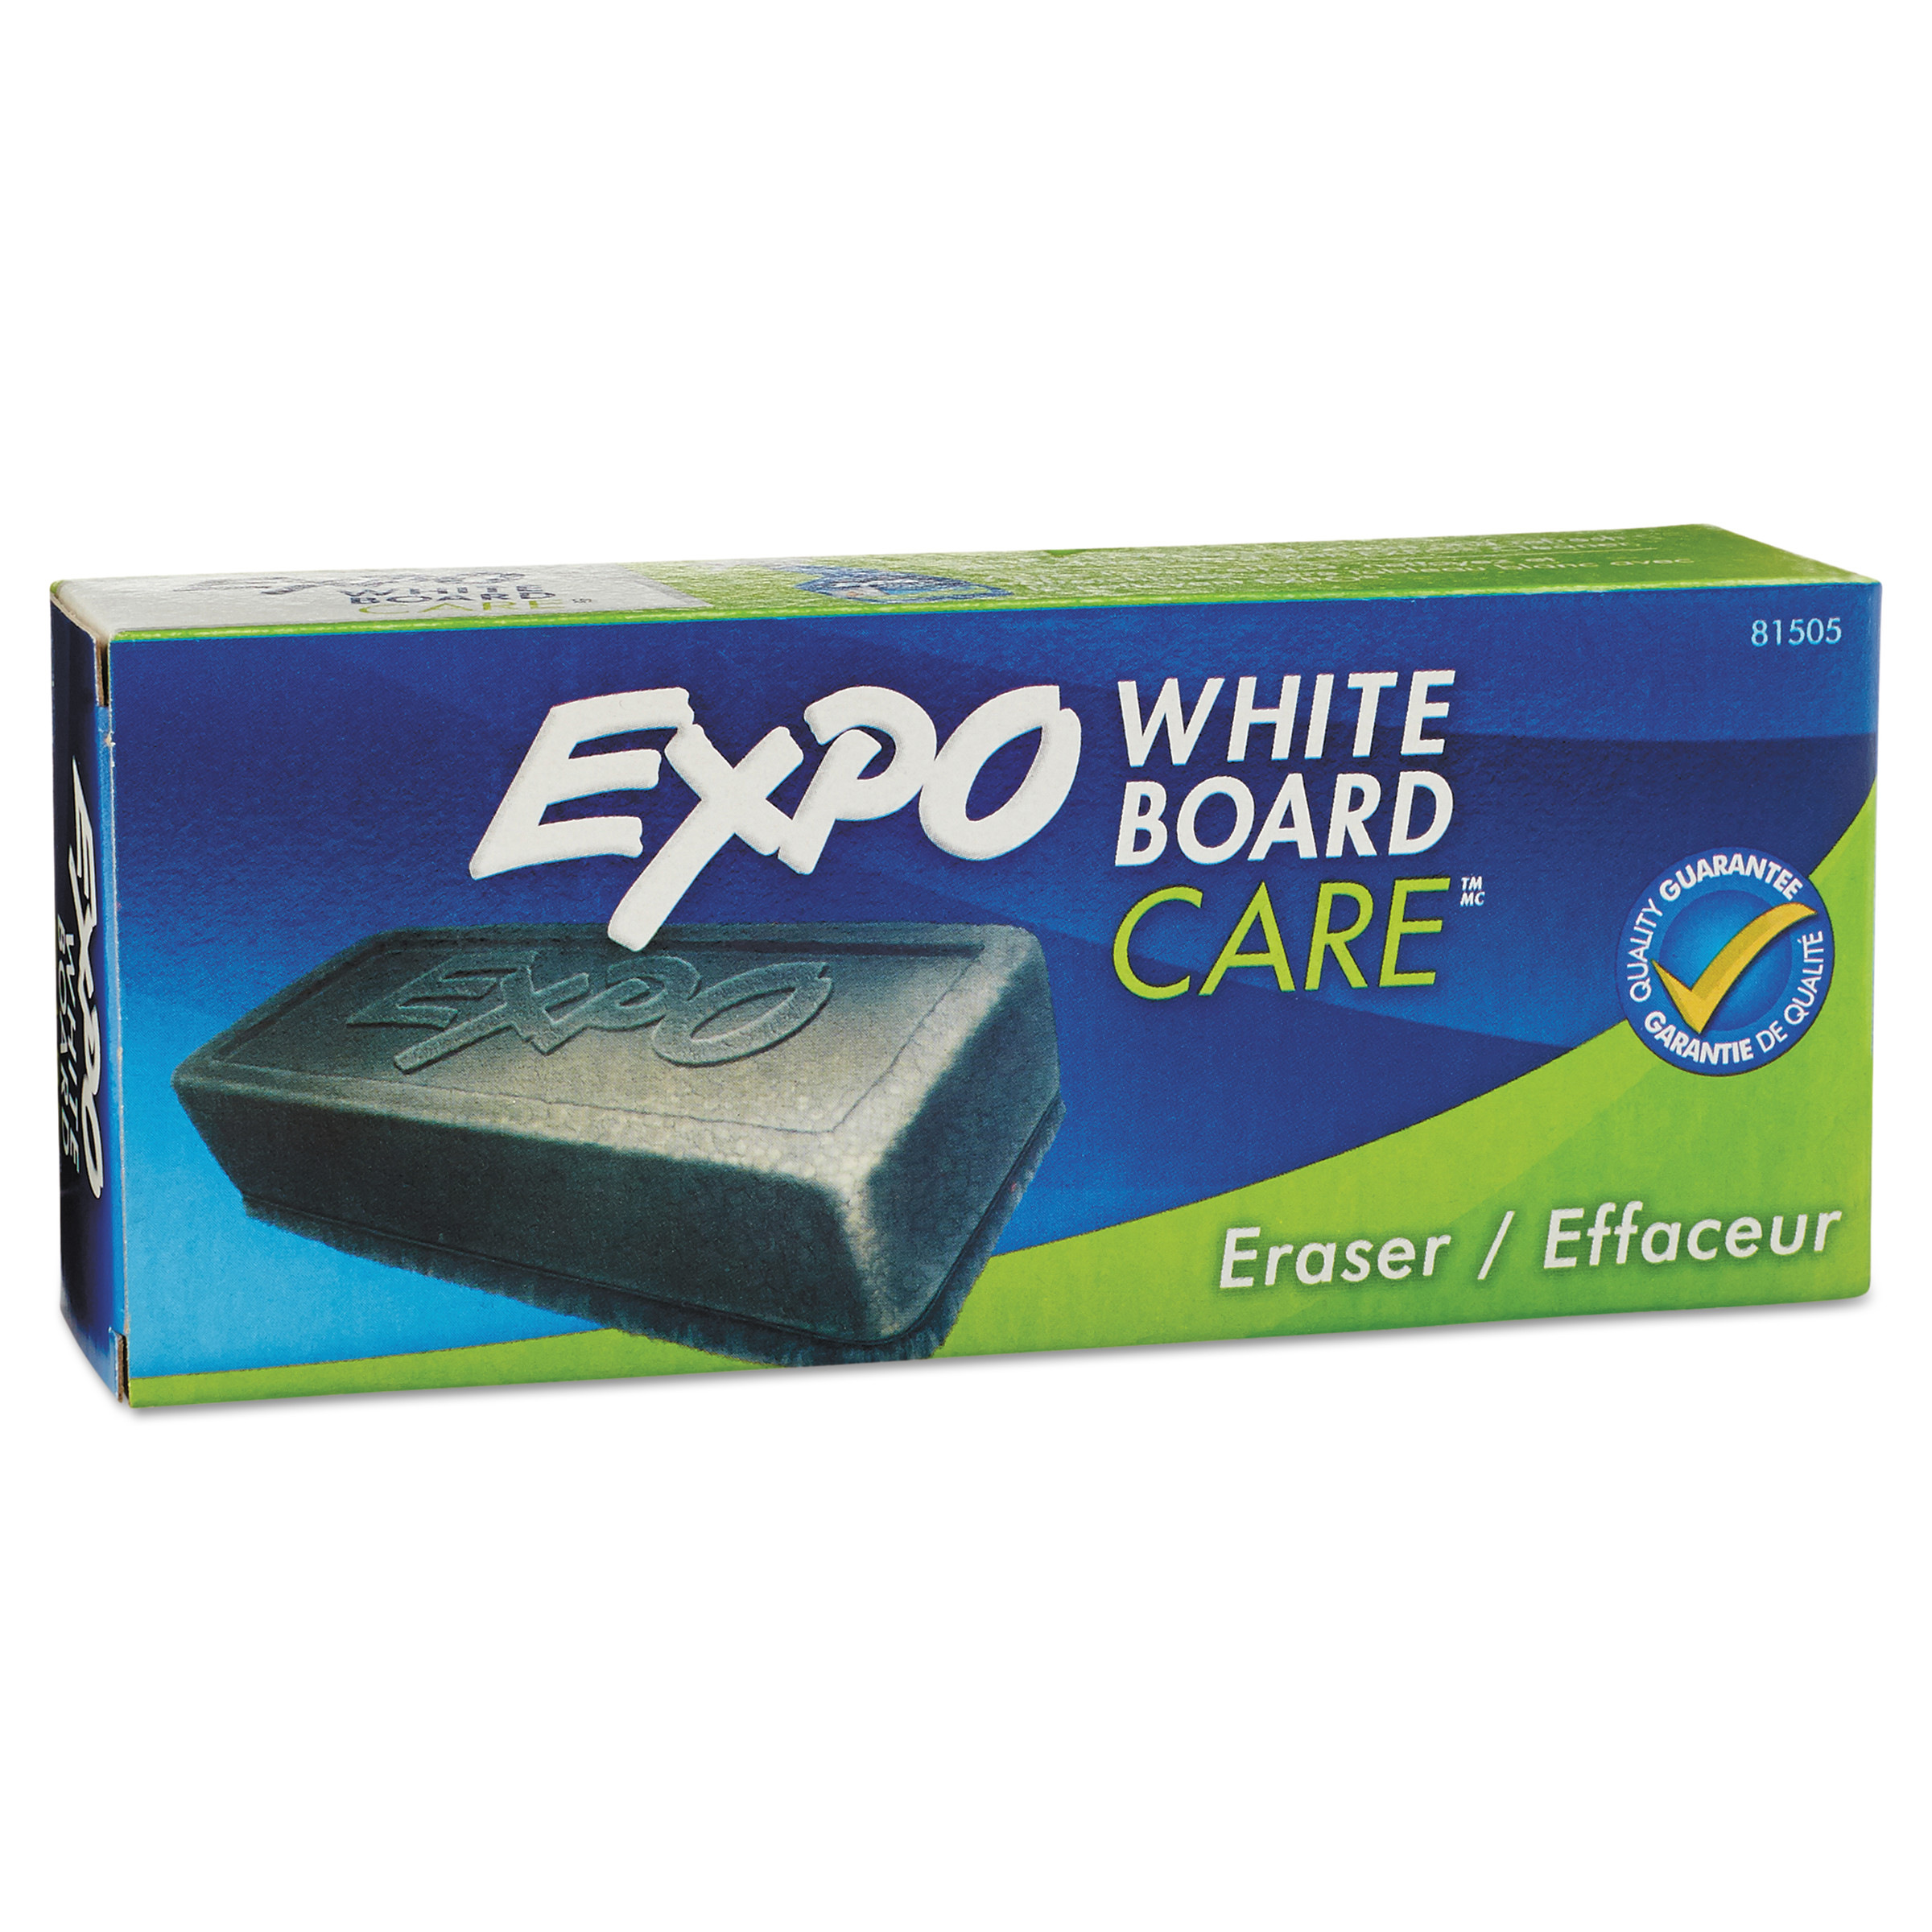 Expo Whiteboard Eraser, 1 Count - image 1 of 6